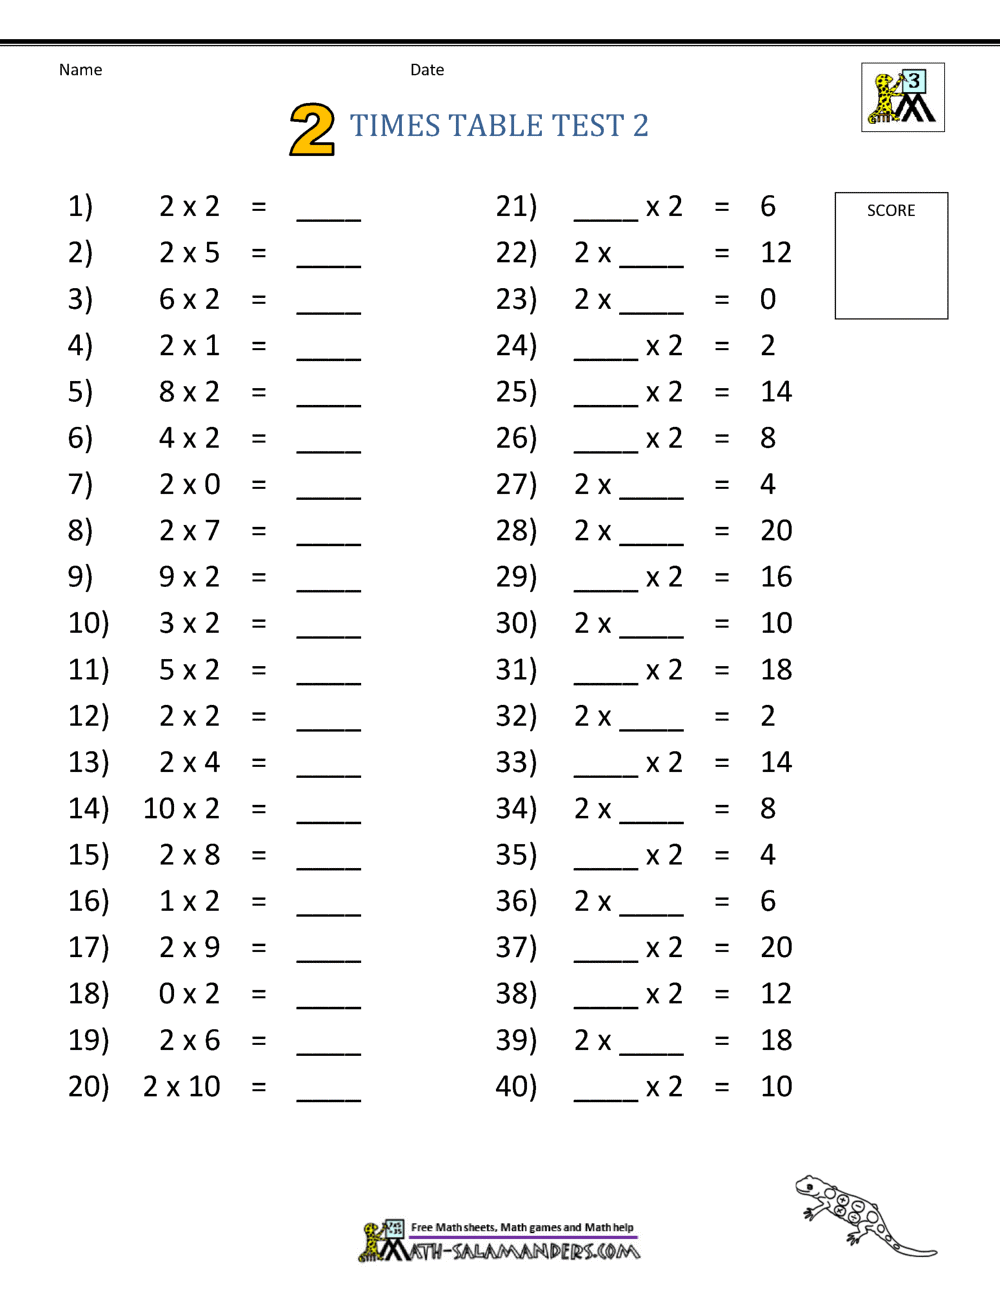 Printable Times Tables - 11 Times Table Sheets Throughout 2 Times Table Worksheet